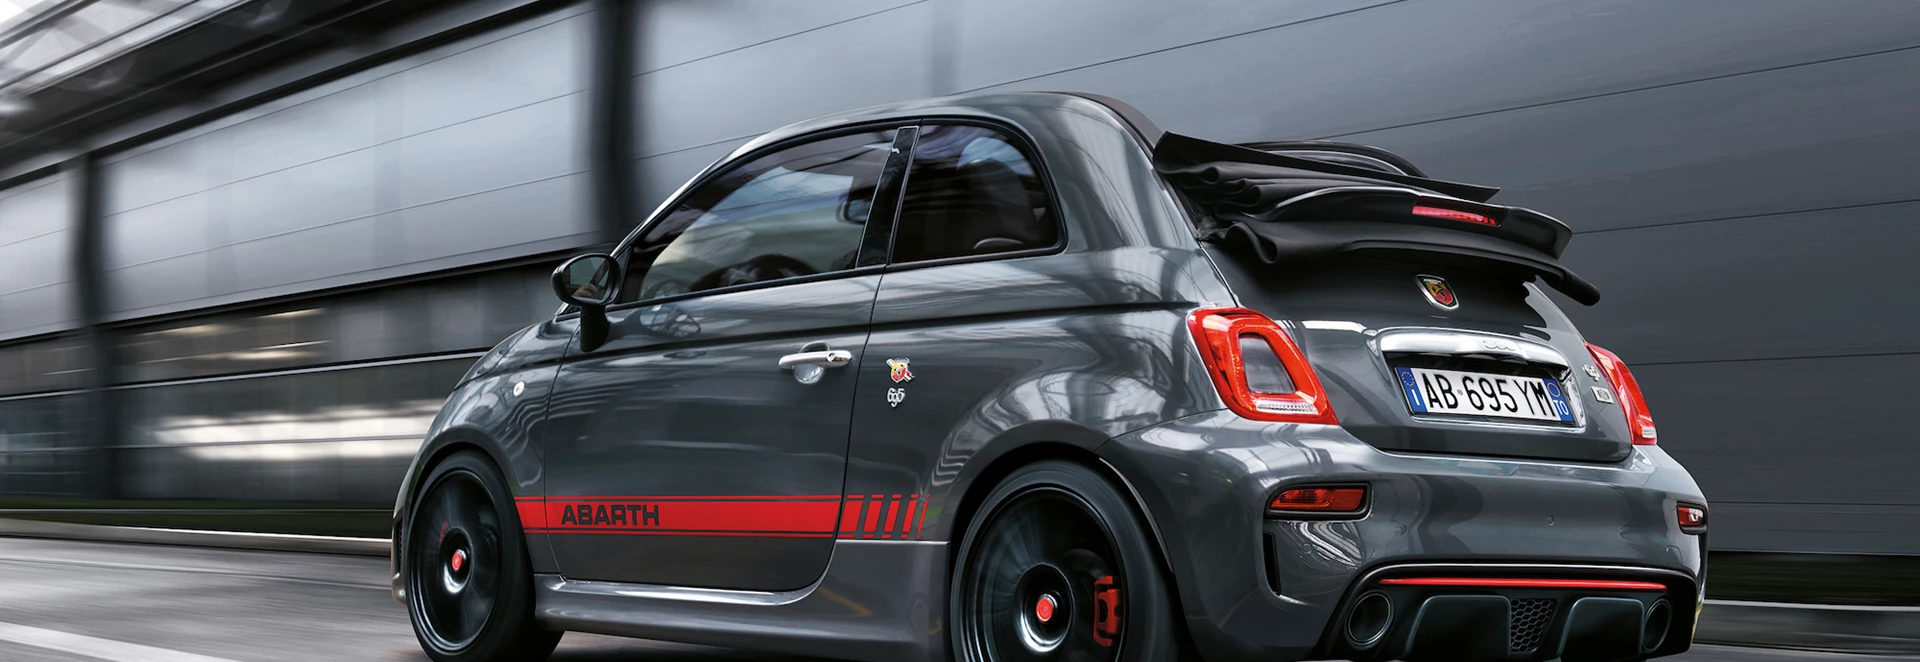 Explained: Abarth Special Series